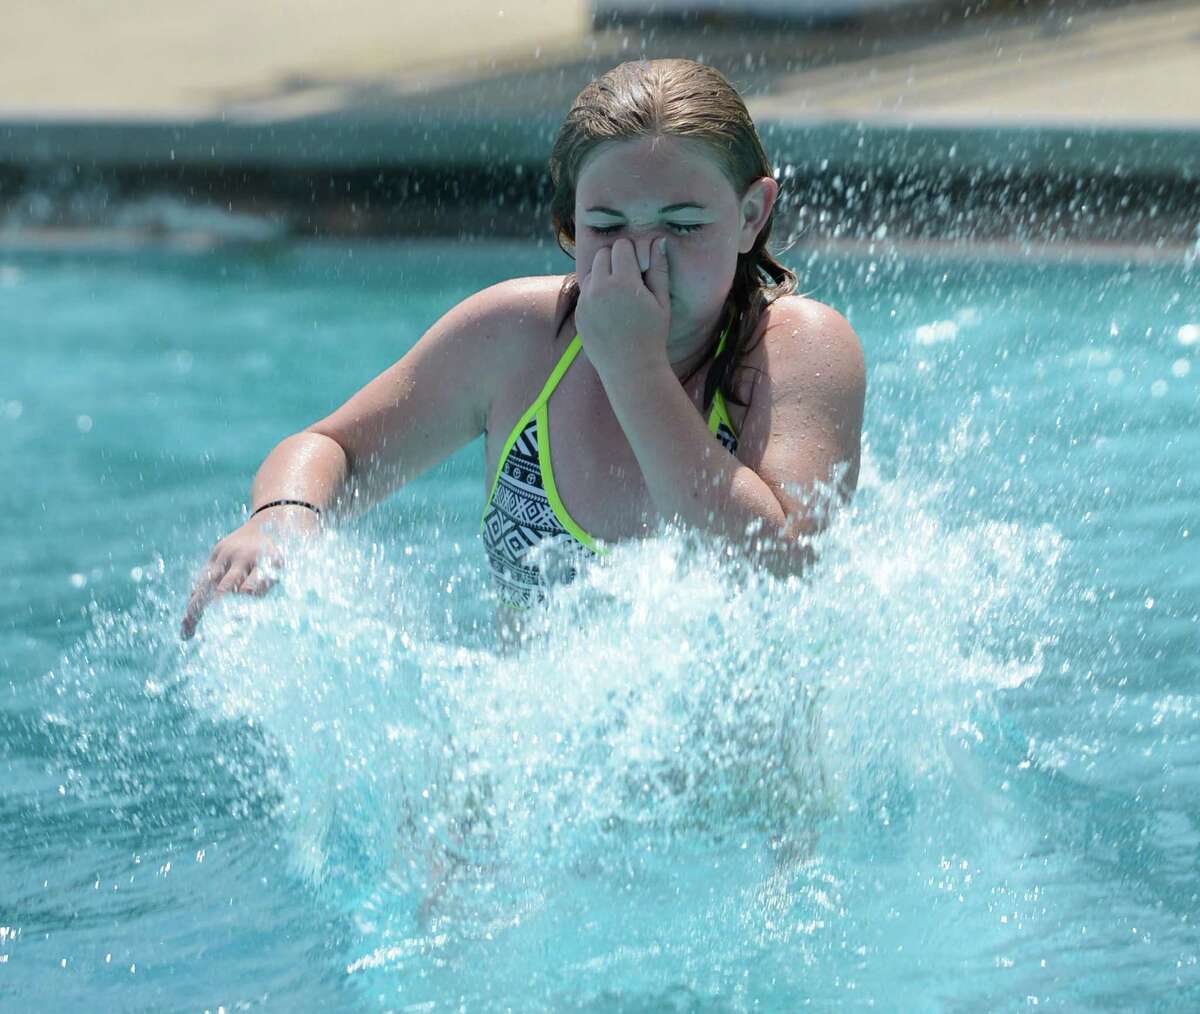 Where are the best places in the area to get cooled off? Let our Best of the Capital Region 2015 reader poll be your guide. Click though the slideshow to see the top beaches and pools in the area, and see what others readers told us they liked.